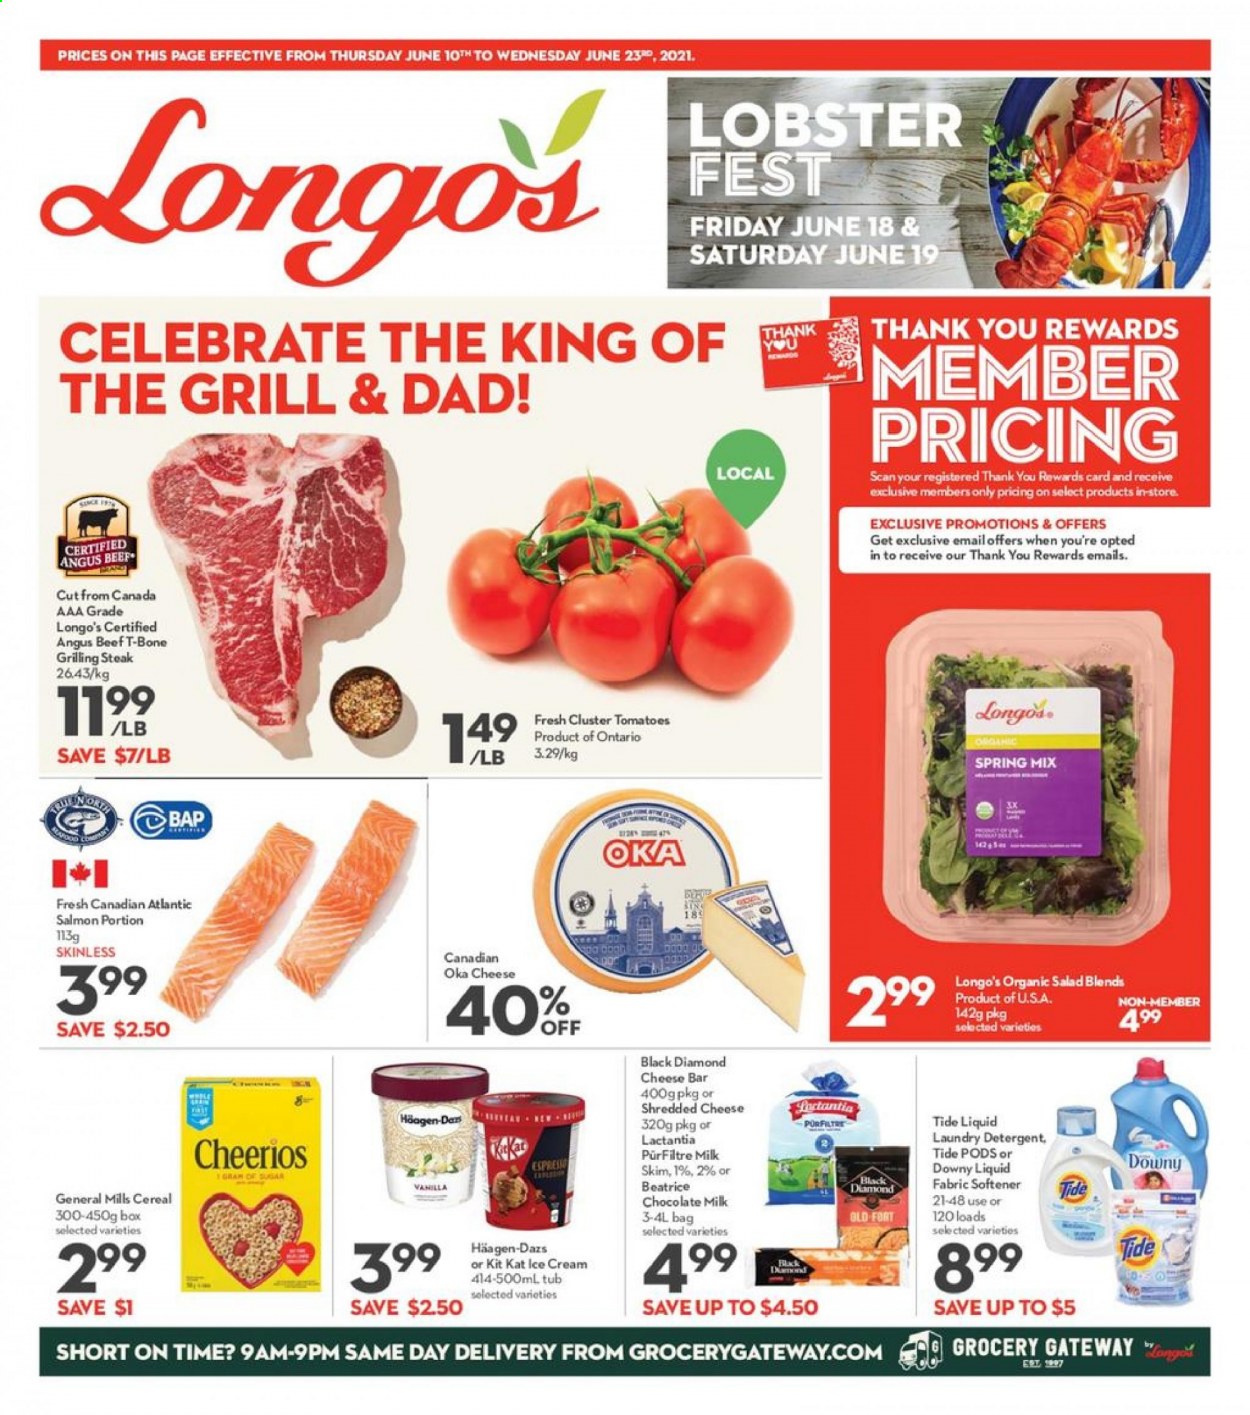 thumbnail - Longo's Flyer - June 10, 2021 - June 23, 2021 - Sales products - tomatoes, salad, lobster, salmon, shredded cheese, milk, ice cream, Häagen-Dazs, milk chocolate, KitKat, sugar, cereals, Cheerios, beef meat, t-bone steak, Tide, fabric softener, laundry detergent, Downy Laundry, bag, steak. Page 1.